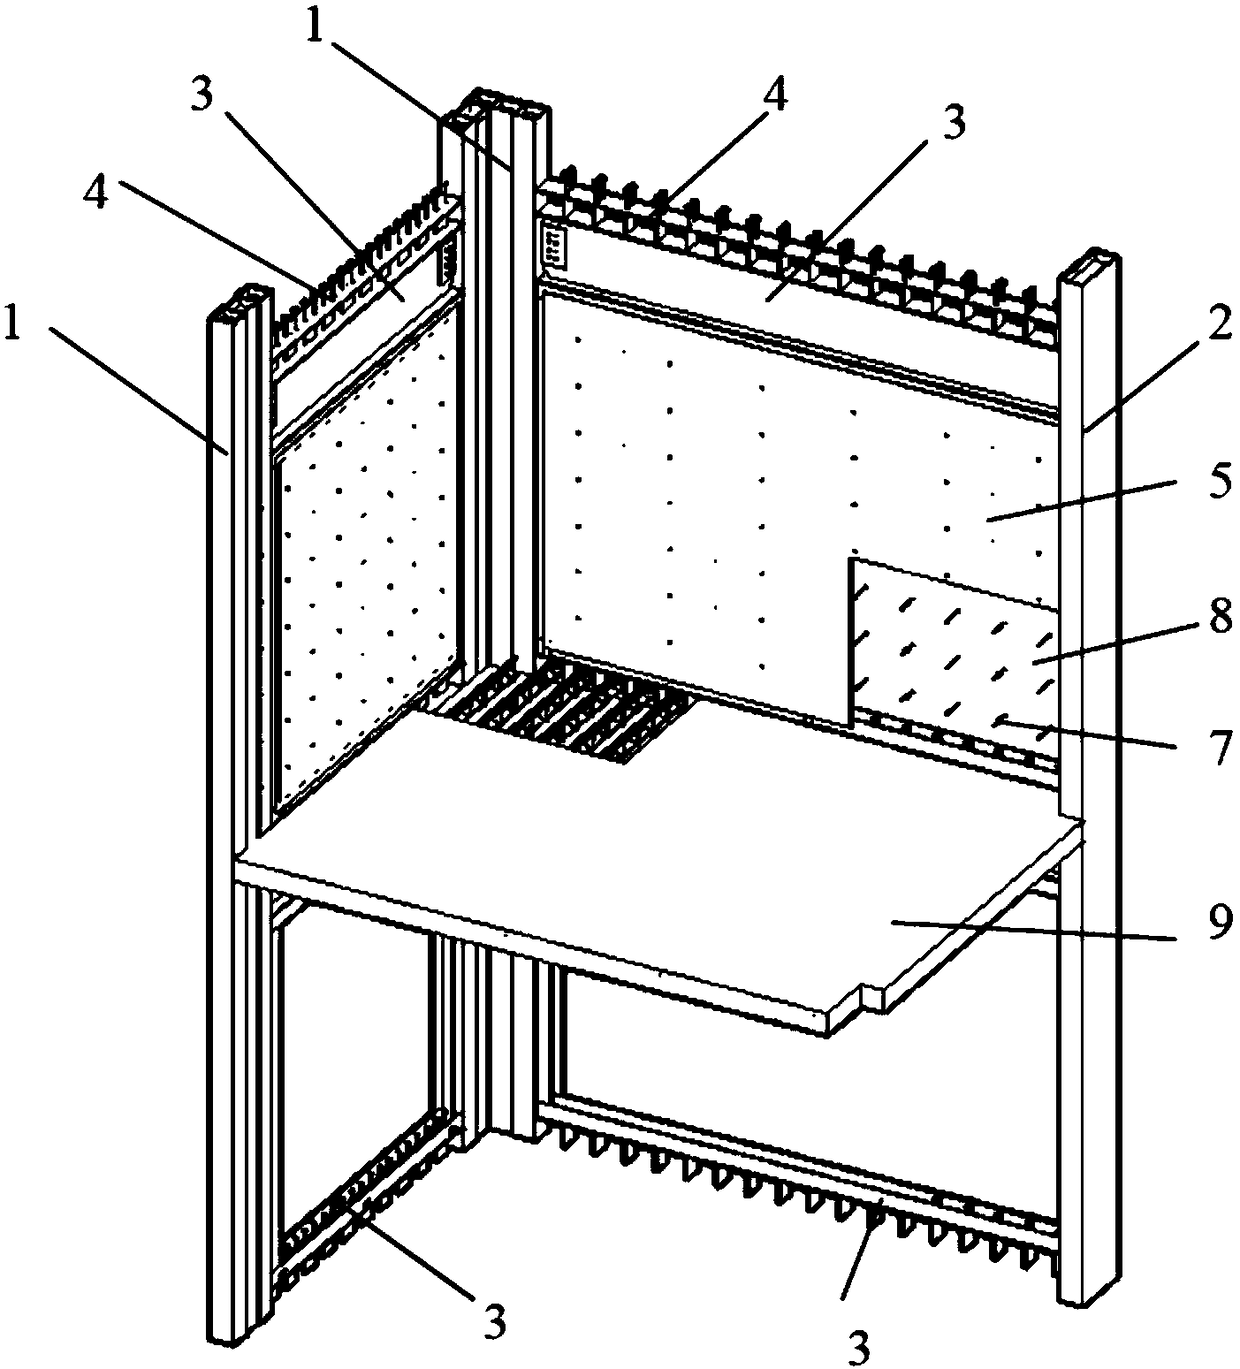 Assembled shear wall formed by combining square steel pipes with steel plate concrete